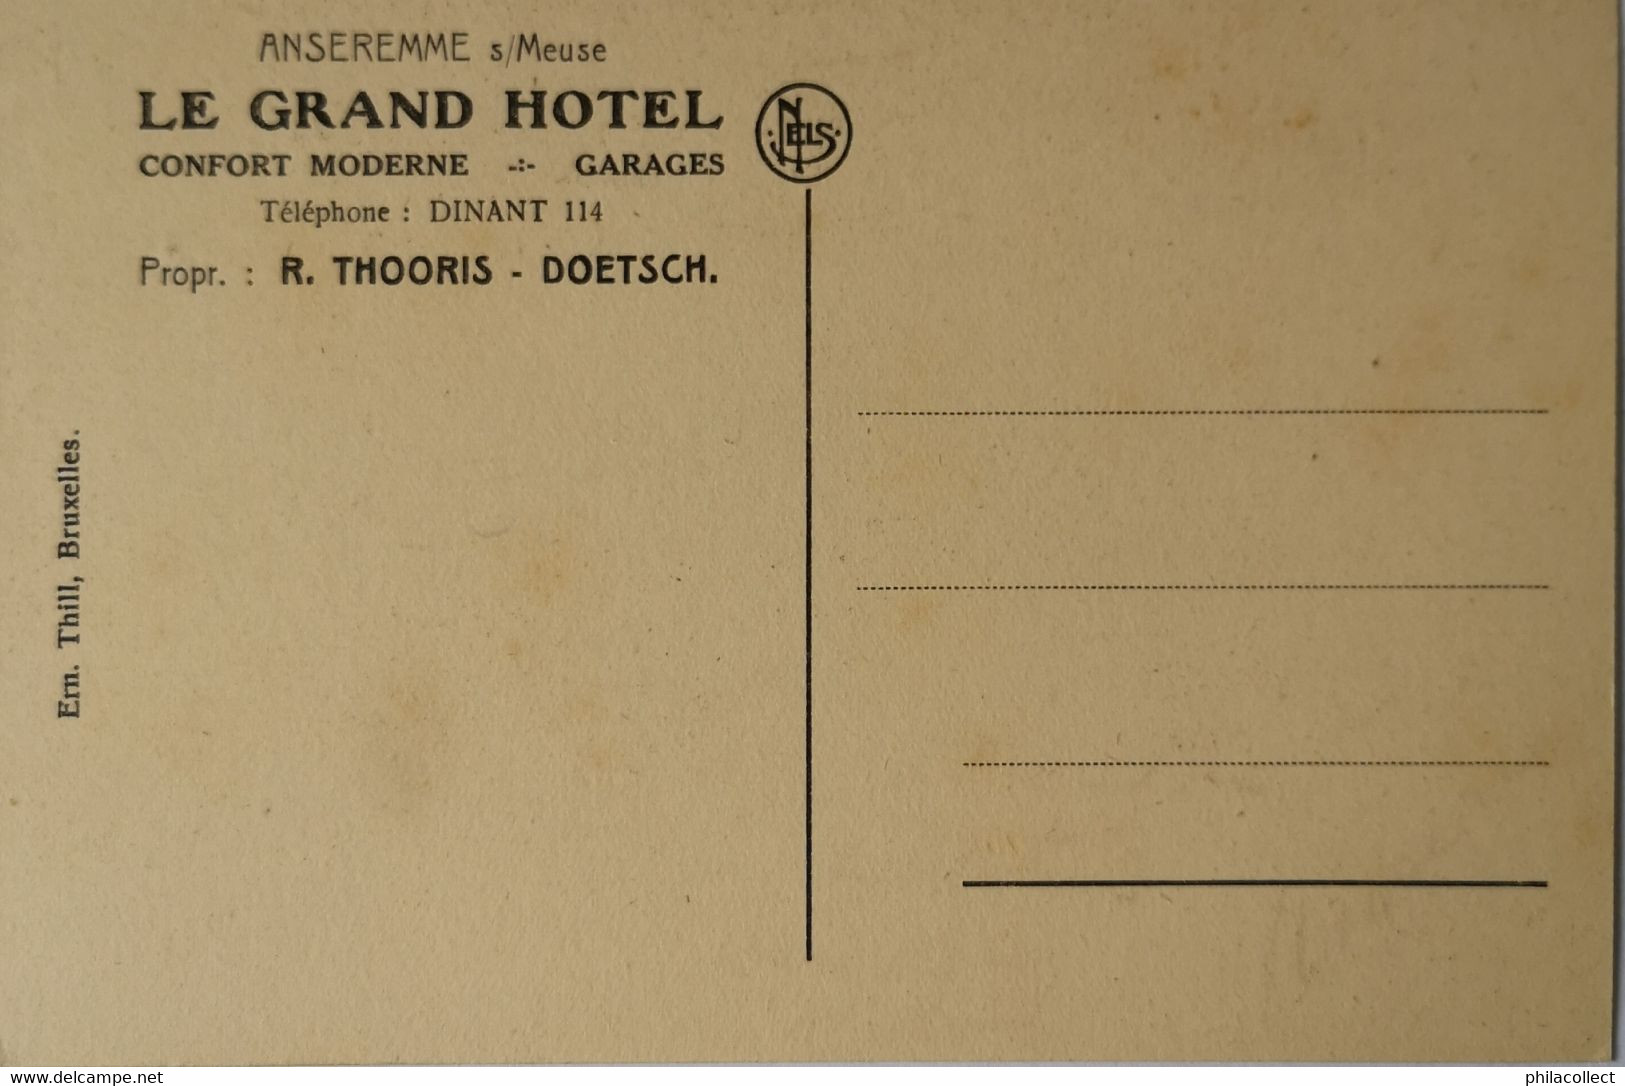 Anseremme S/Meuse // Le Grand Hotel (niet Standaard) 19?? - Dinant